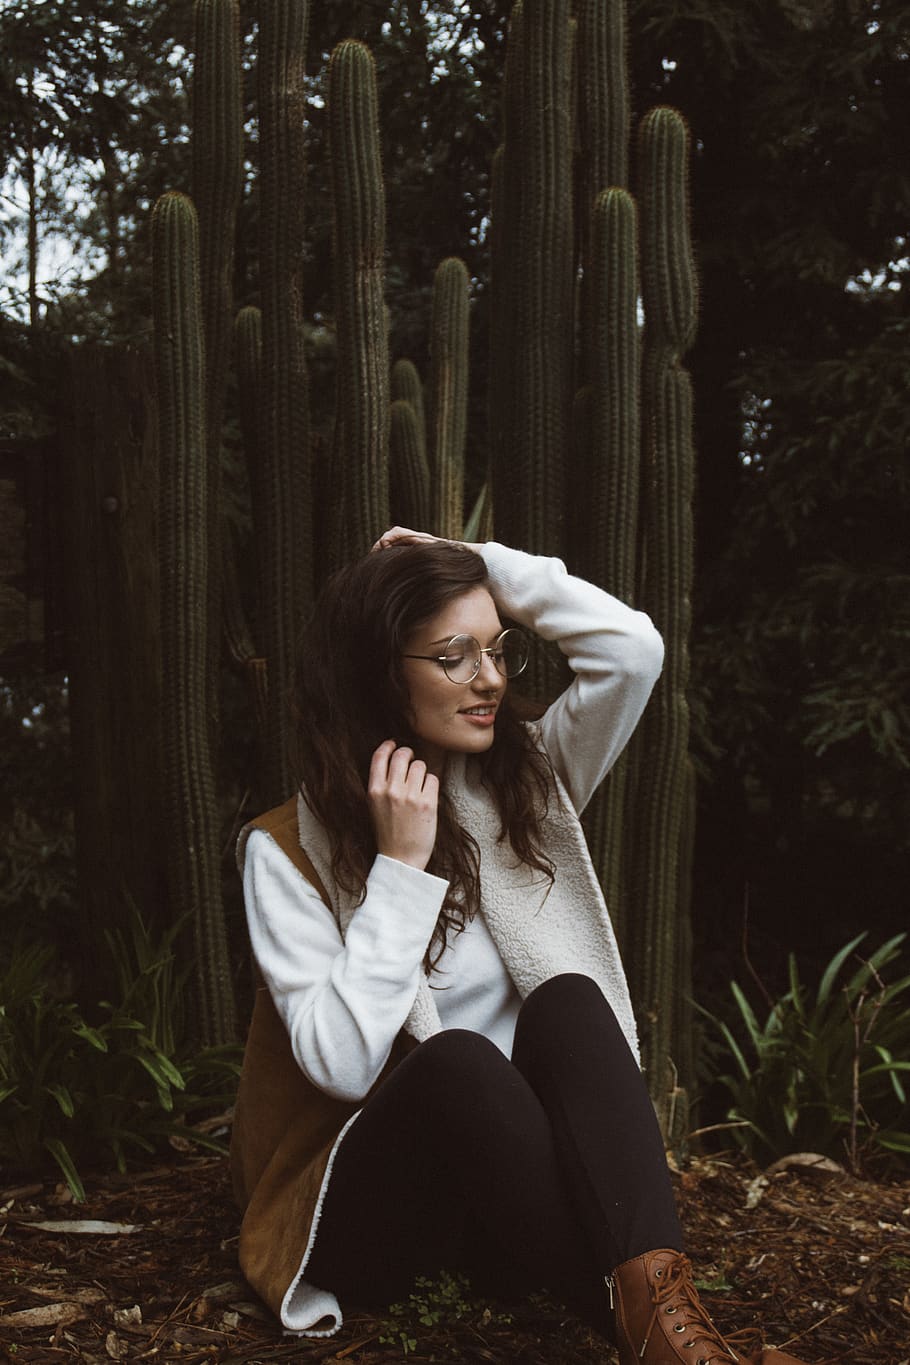 people, woman, fashion, beauty, eyeglasses, woods, forest, sweater, cactus, boots